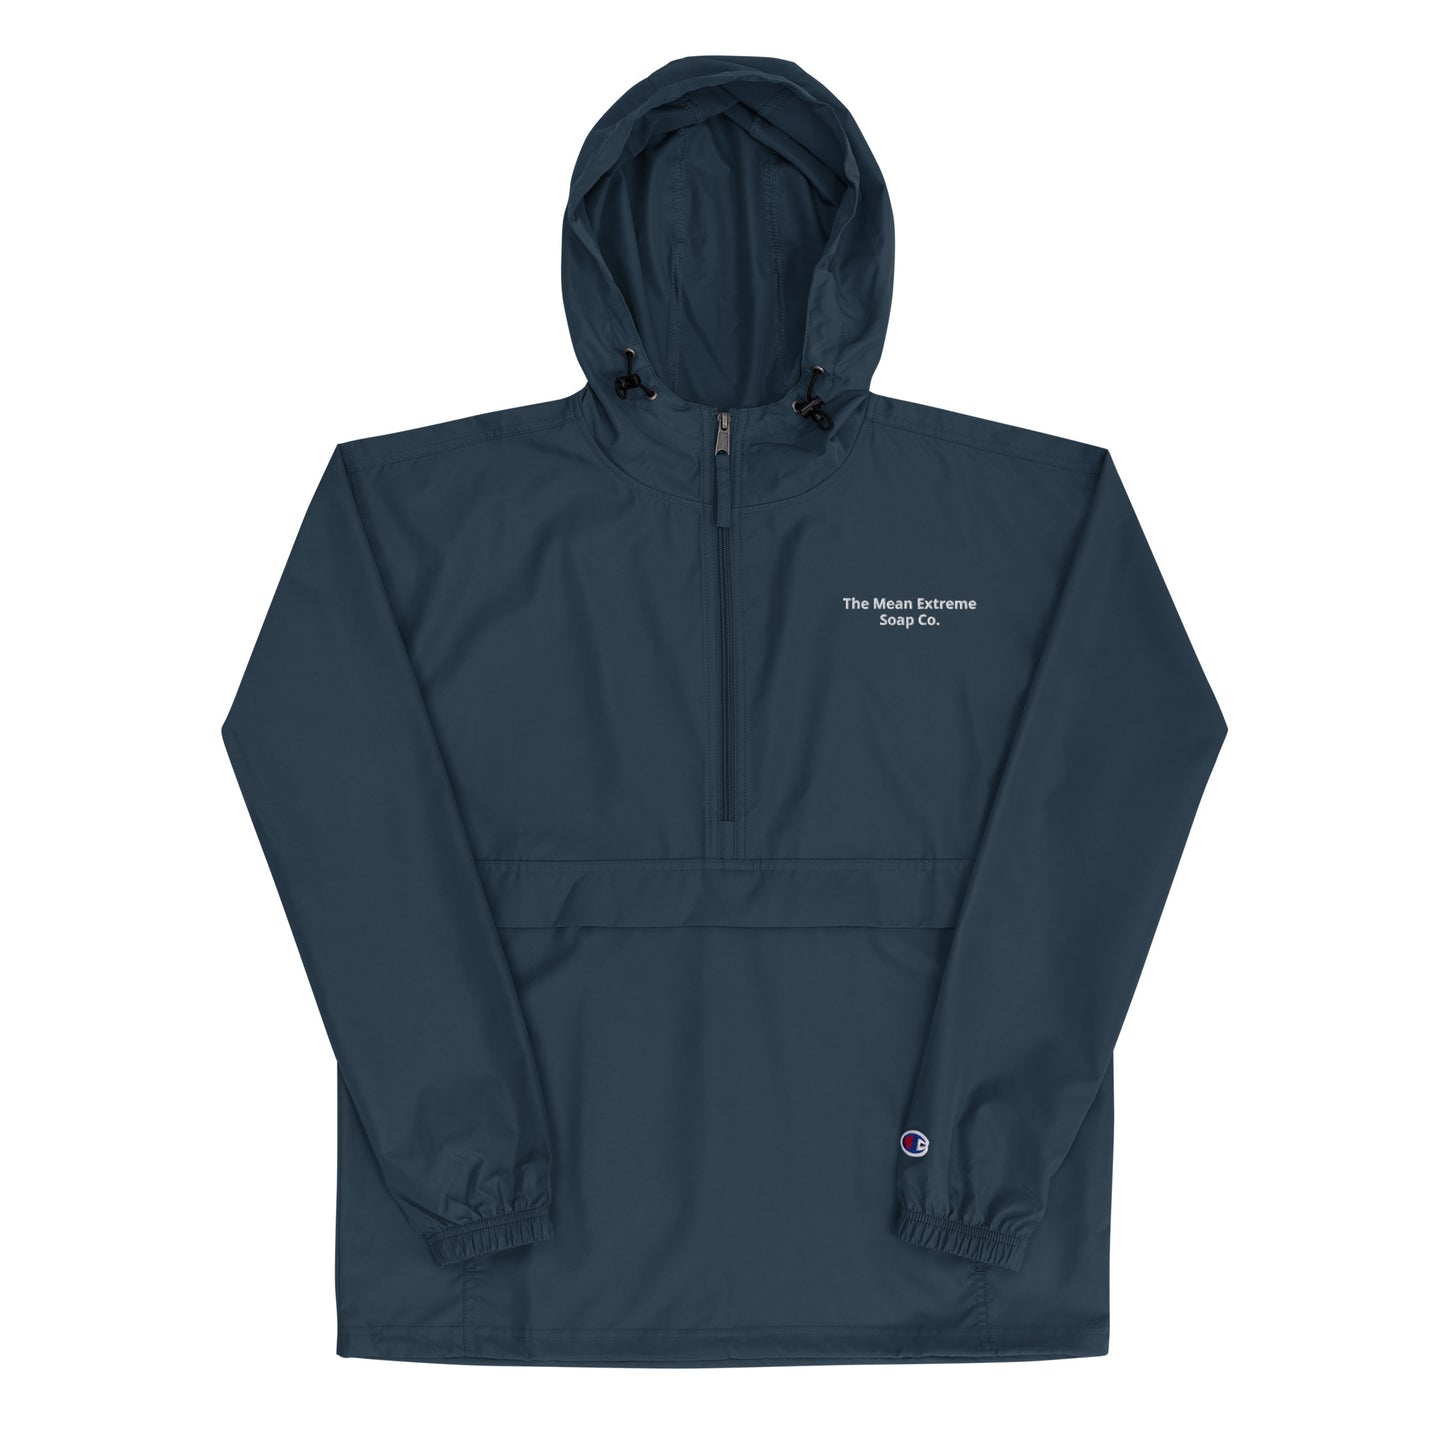 The Mean Extreme Expedition Packable Embroidered Champion Jacket